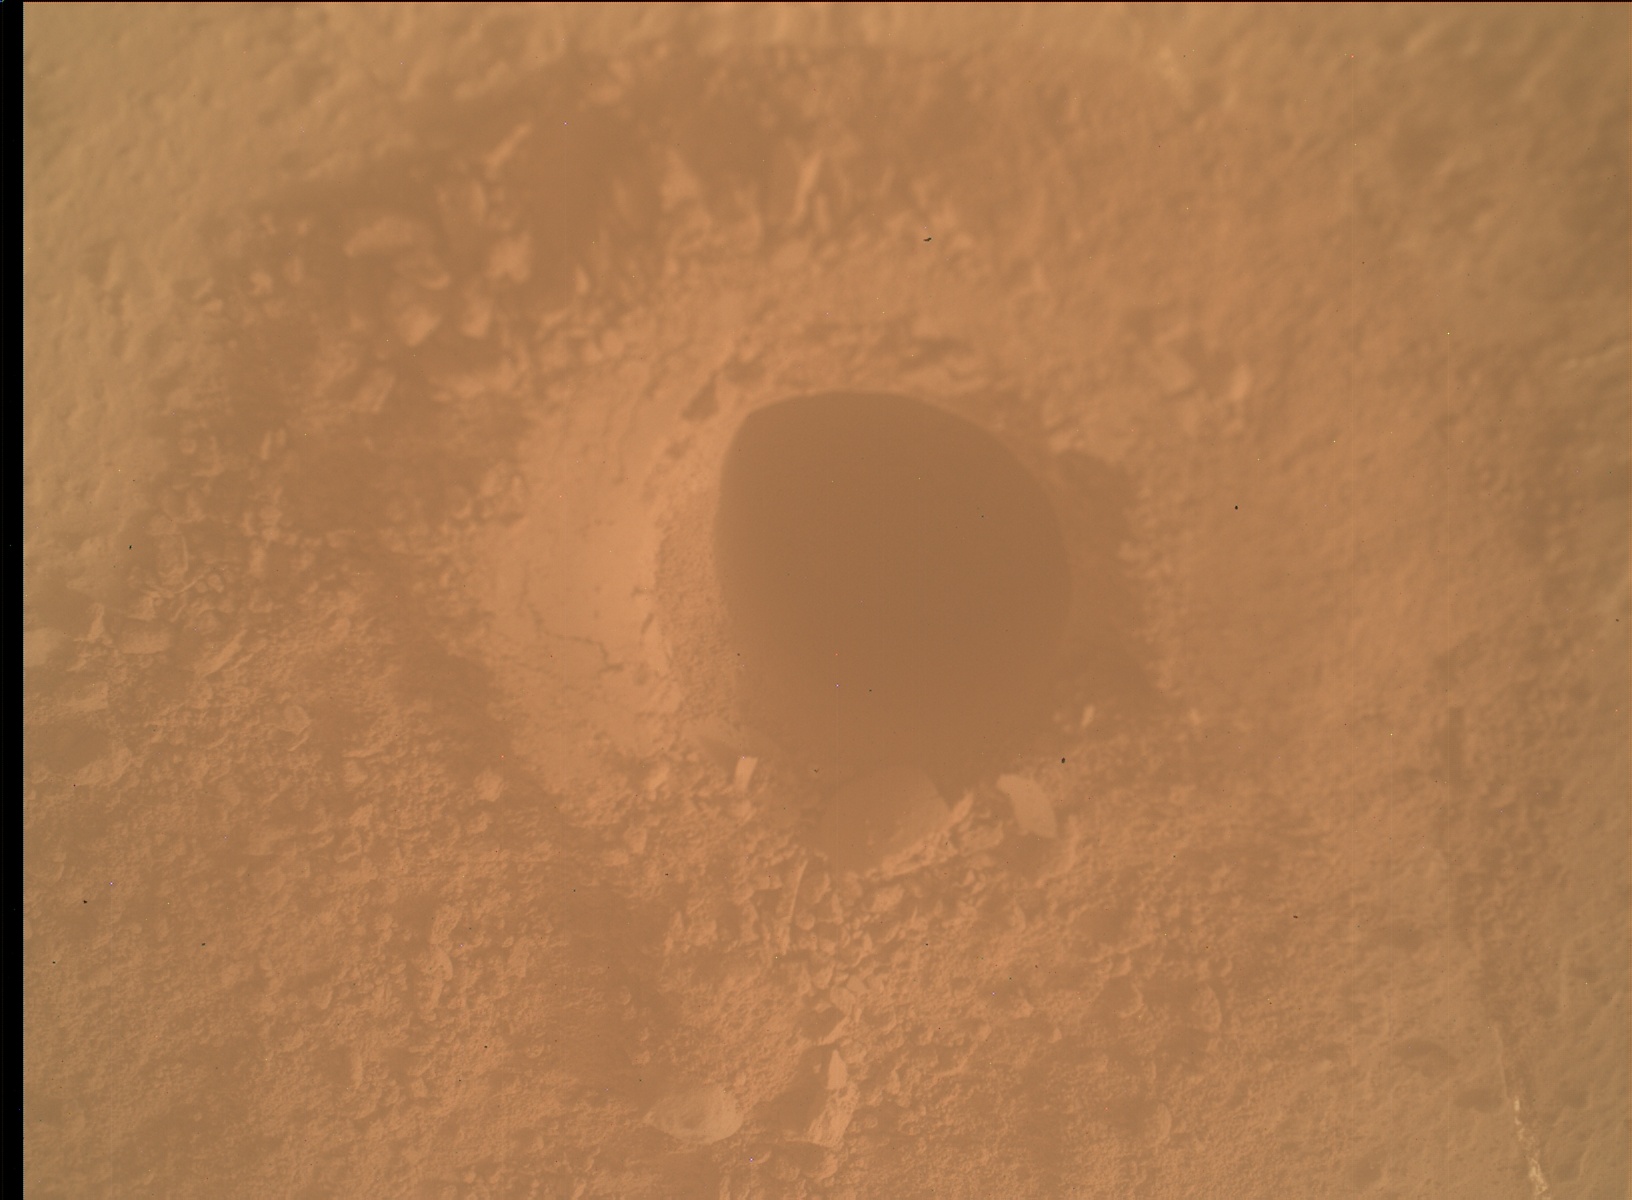 Nasa's Mars rover Curiosity acquired this image using its Mars Hand Lens Imager (MAHLI) on Sol 1496